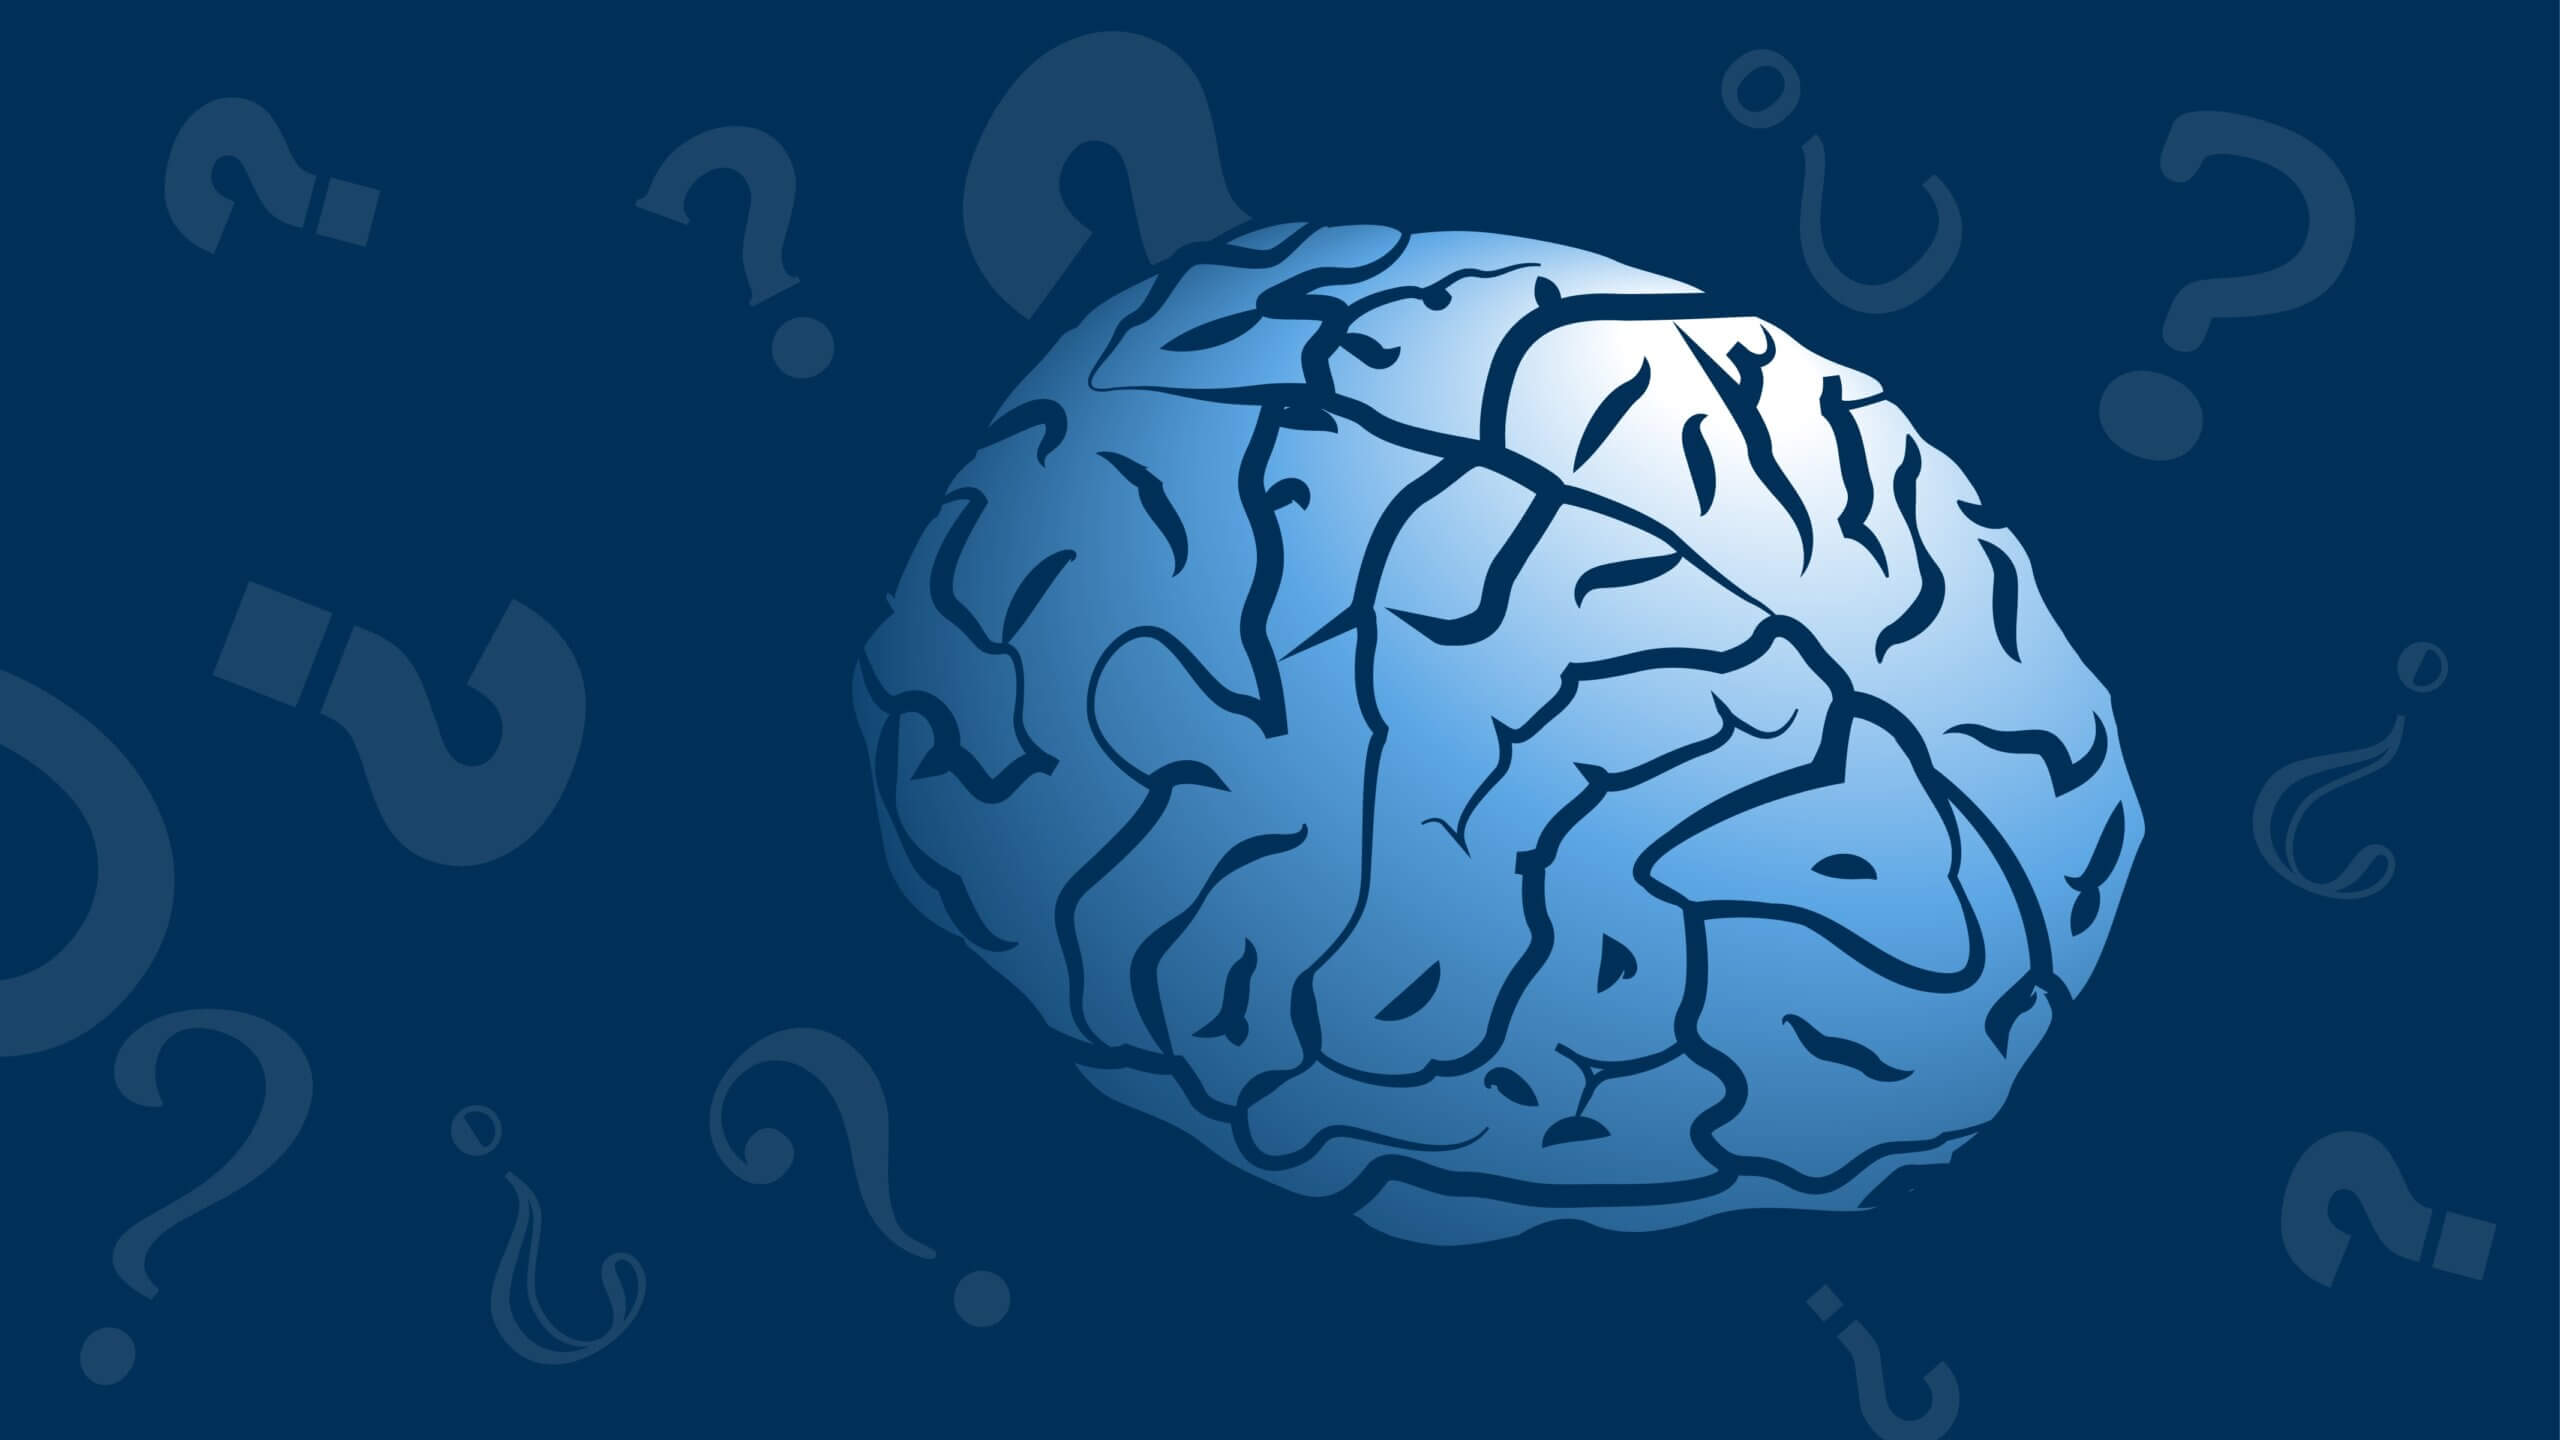 Illustration of a brain surrounded by question marks